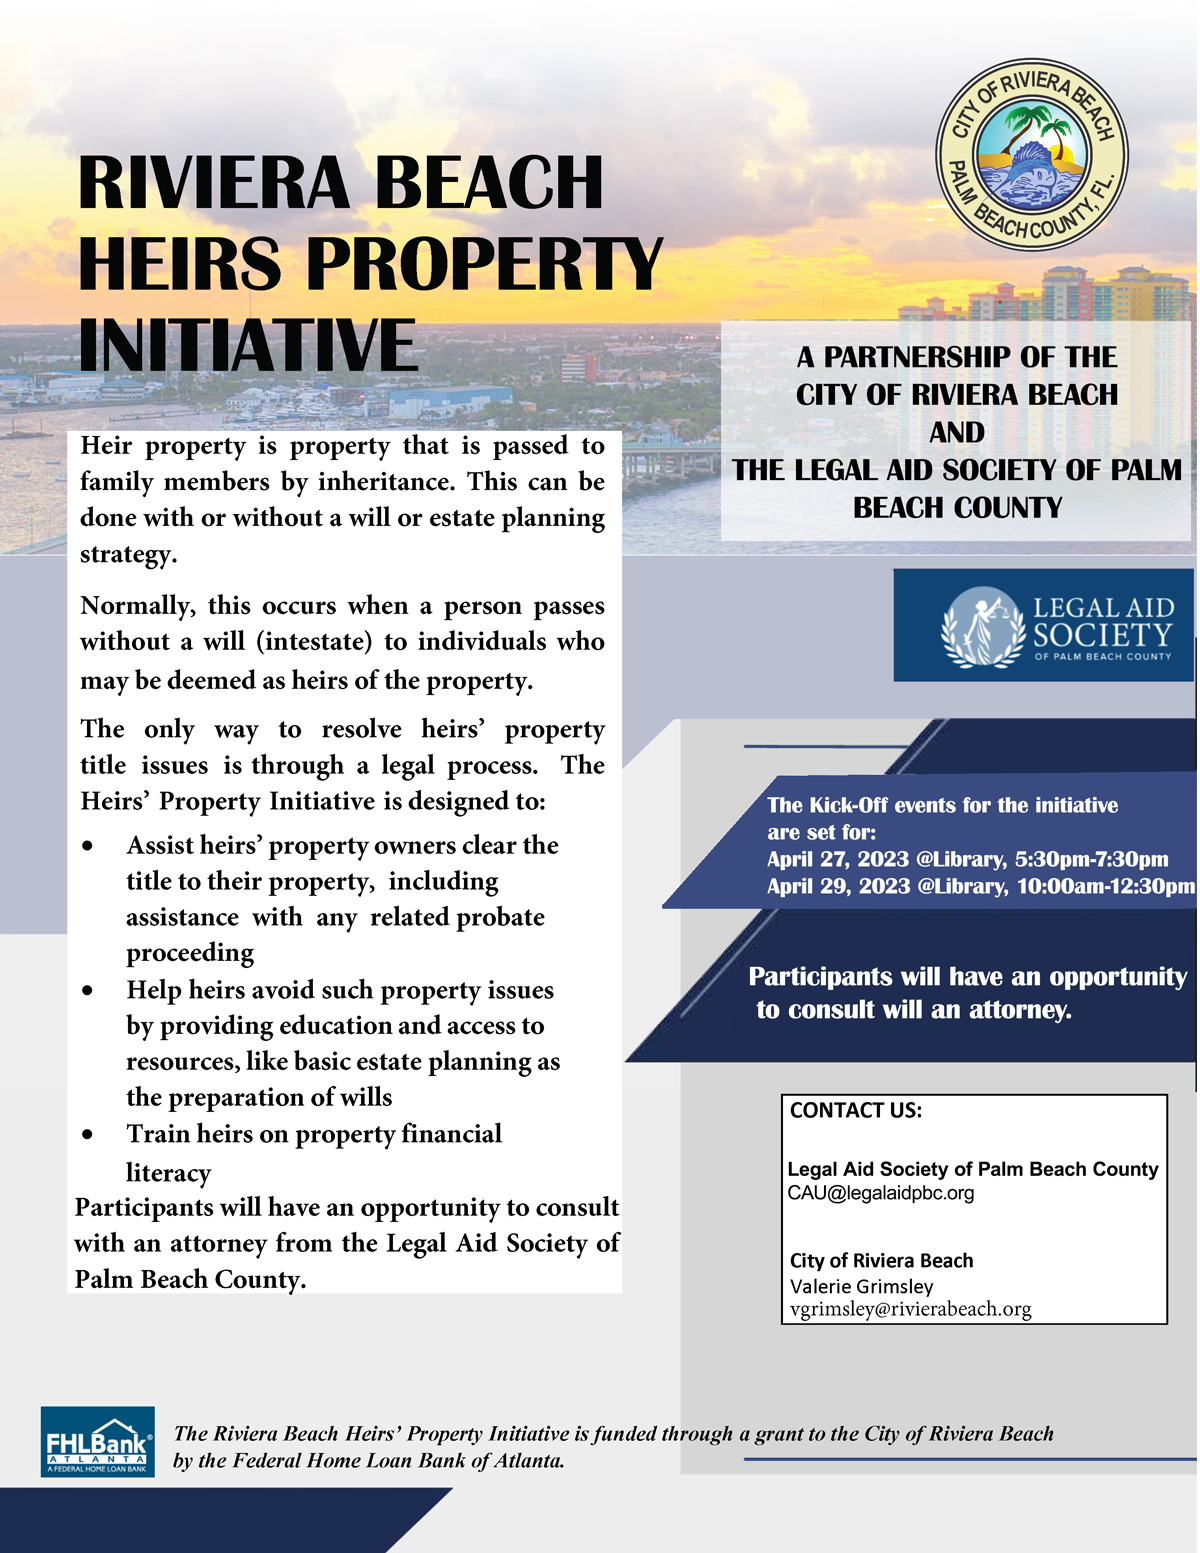 Heir property is property that is passed to family members by inheritance. This can be done with or without a will or estate planning strategy. Normally, this occurs when a person passes without a will (intestate) to individuals who may be deemed as heirs of the property. The only way to resolve heirs' property title issues is through a legal process. The Heirs' Property Initiative is designed to: Assist heirs' property owners clear the title to their property, including assistance with any related probate proceeding Help heirs avoid such property issues by providing education and access to resources, like basic estate planning as the preparation of wills Train heirs on property financial literacy Participants will have an opportunity to consult with an attorney from the Legal Aid Society of Palm Beach County.The Kick-Off events for the initiative are set for: April 27, 2023 @Library, 5:30pm-7:30pm April 29, 2023 @Library, 10:00am-12:30pm